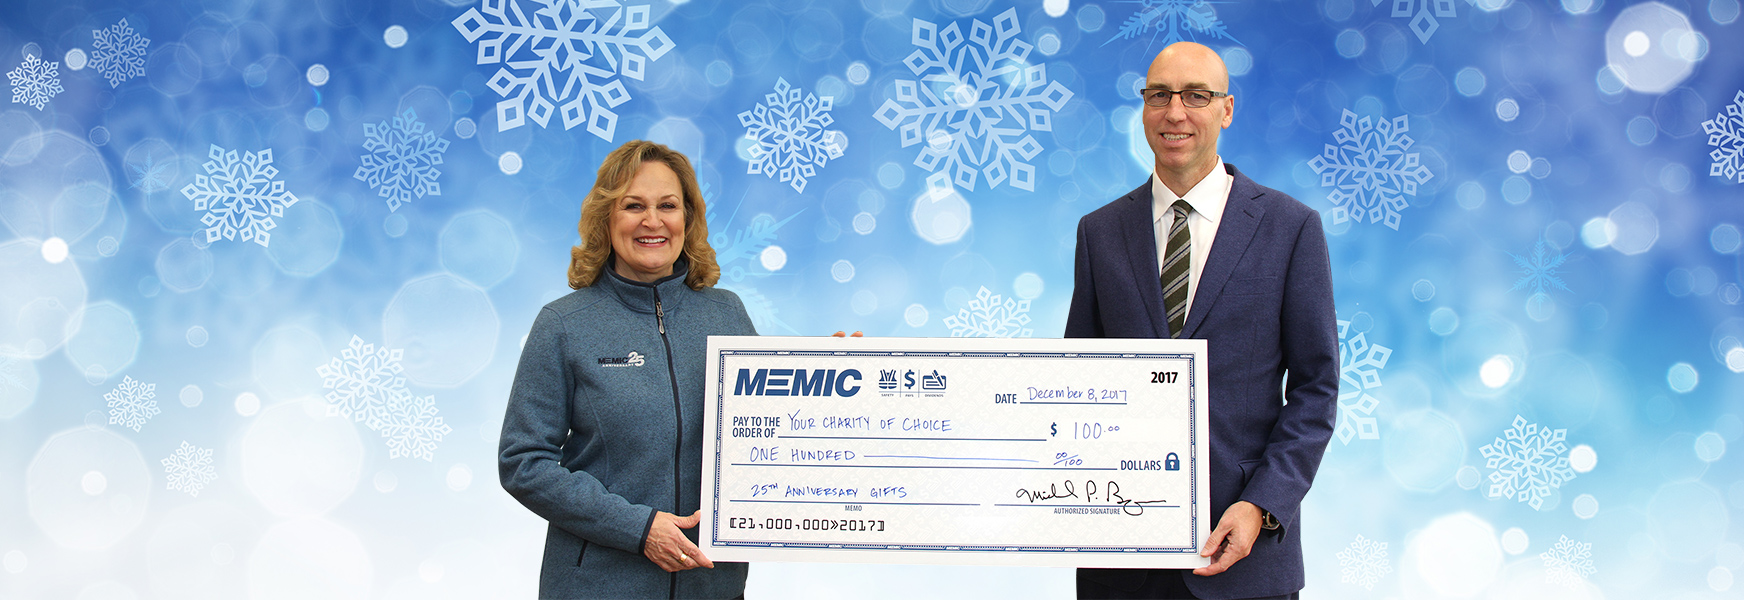 Catherine Lamson and Mike Bourque with big check